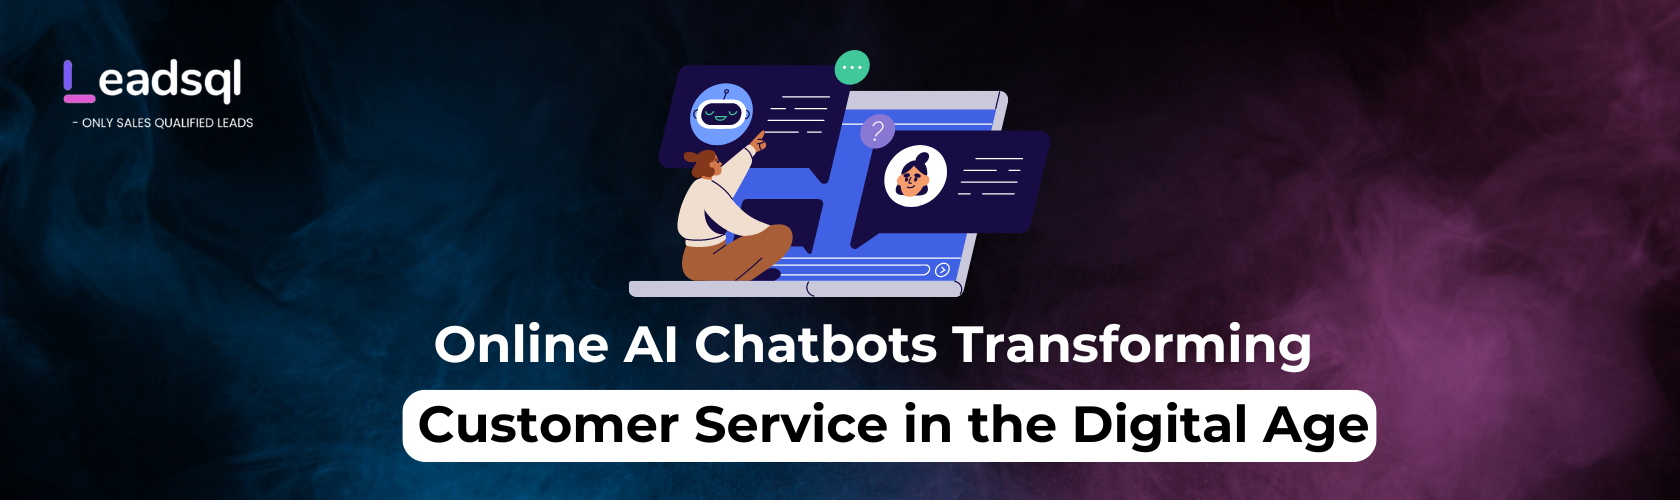 Online AI Chatbots: Transforming Customer Service in the Digital Age